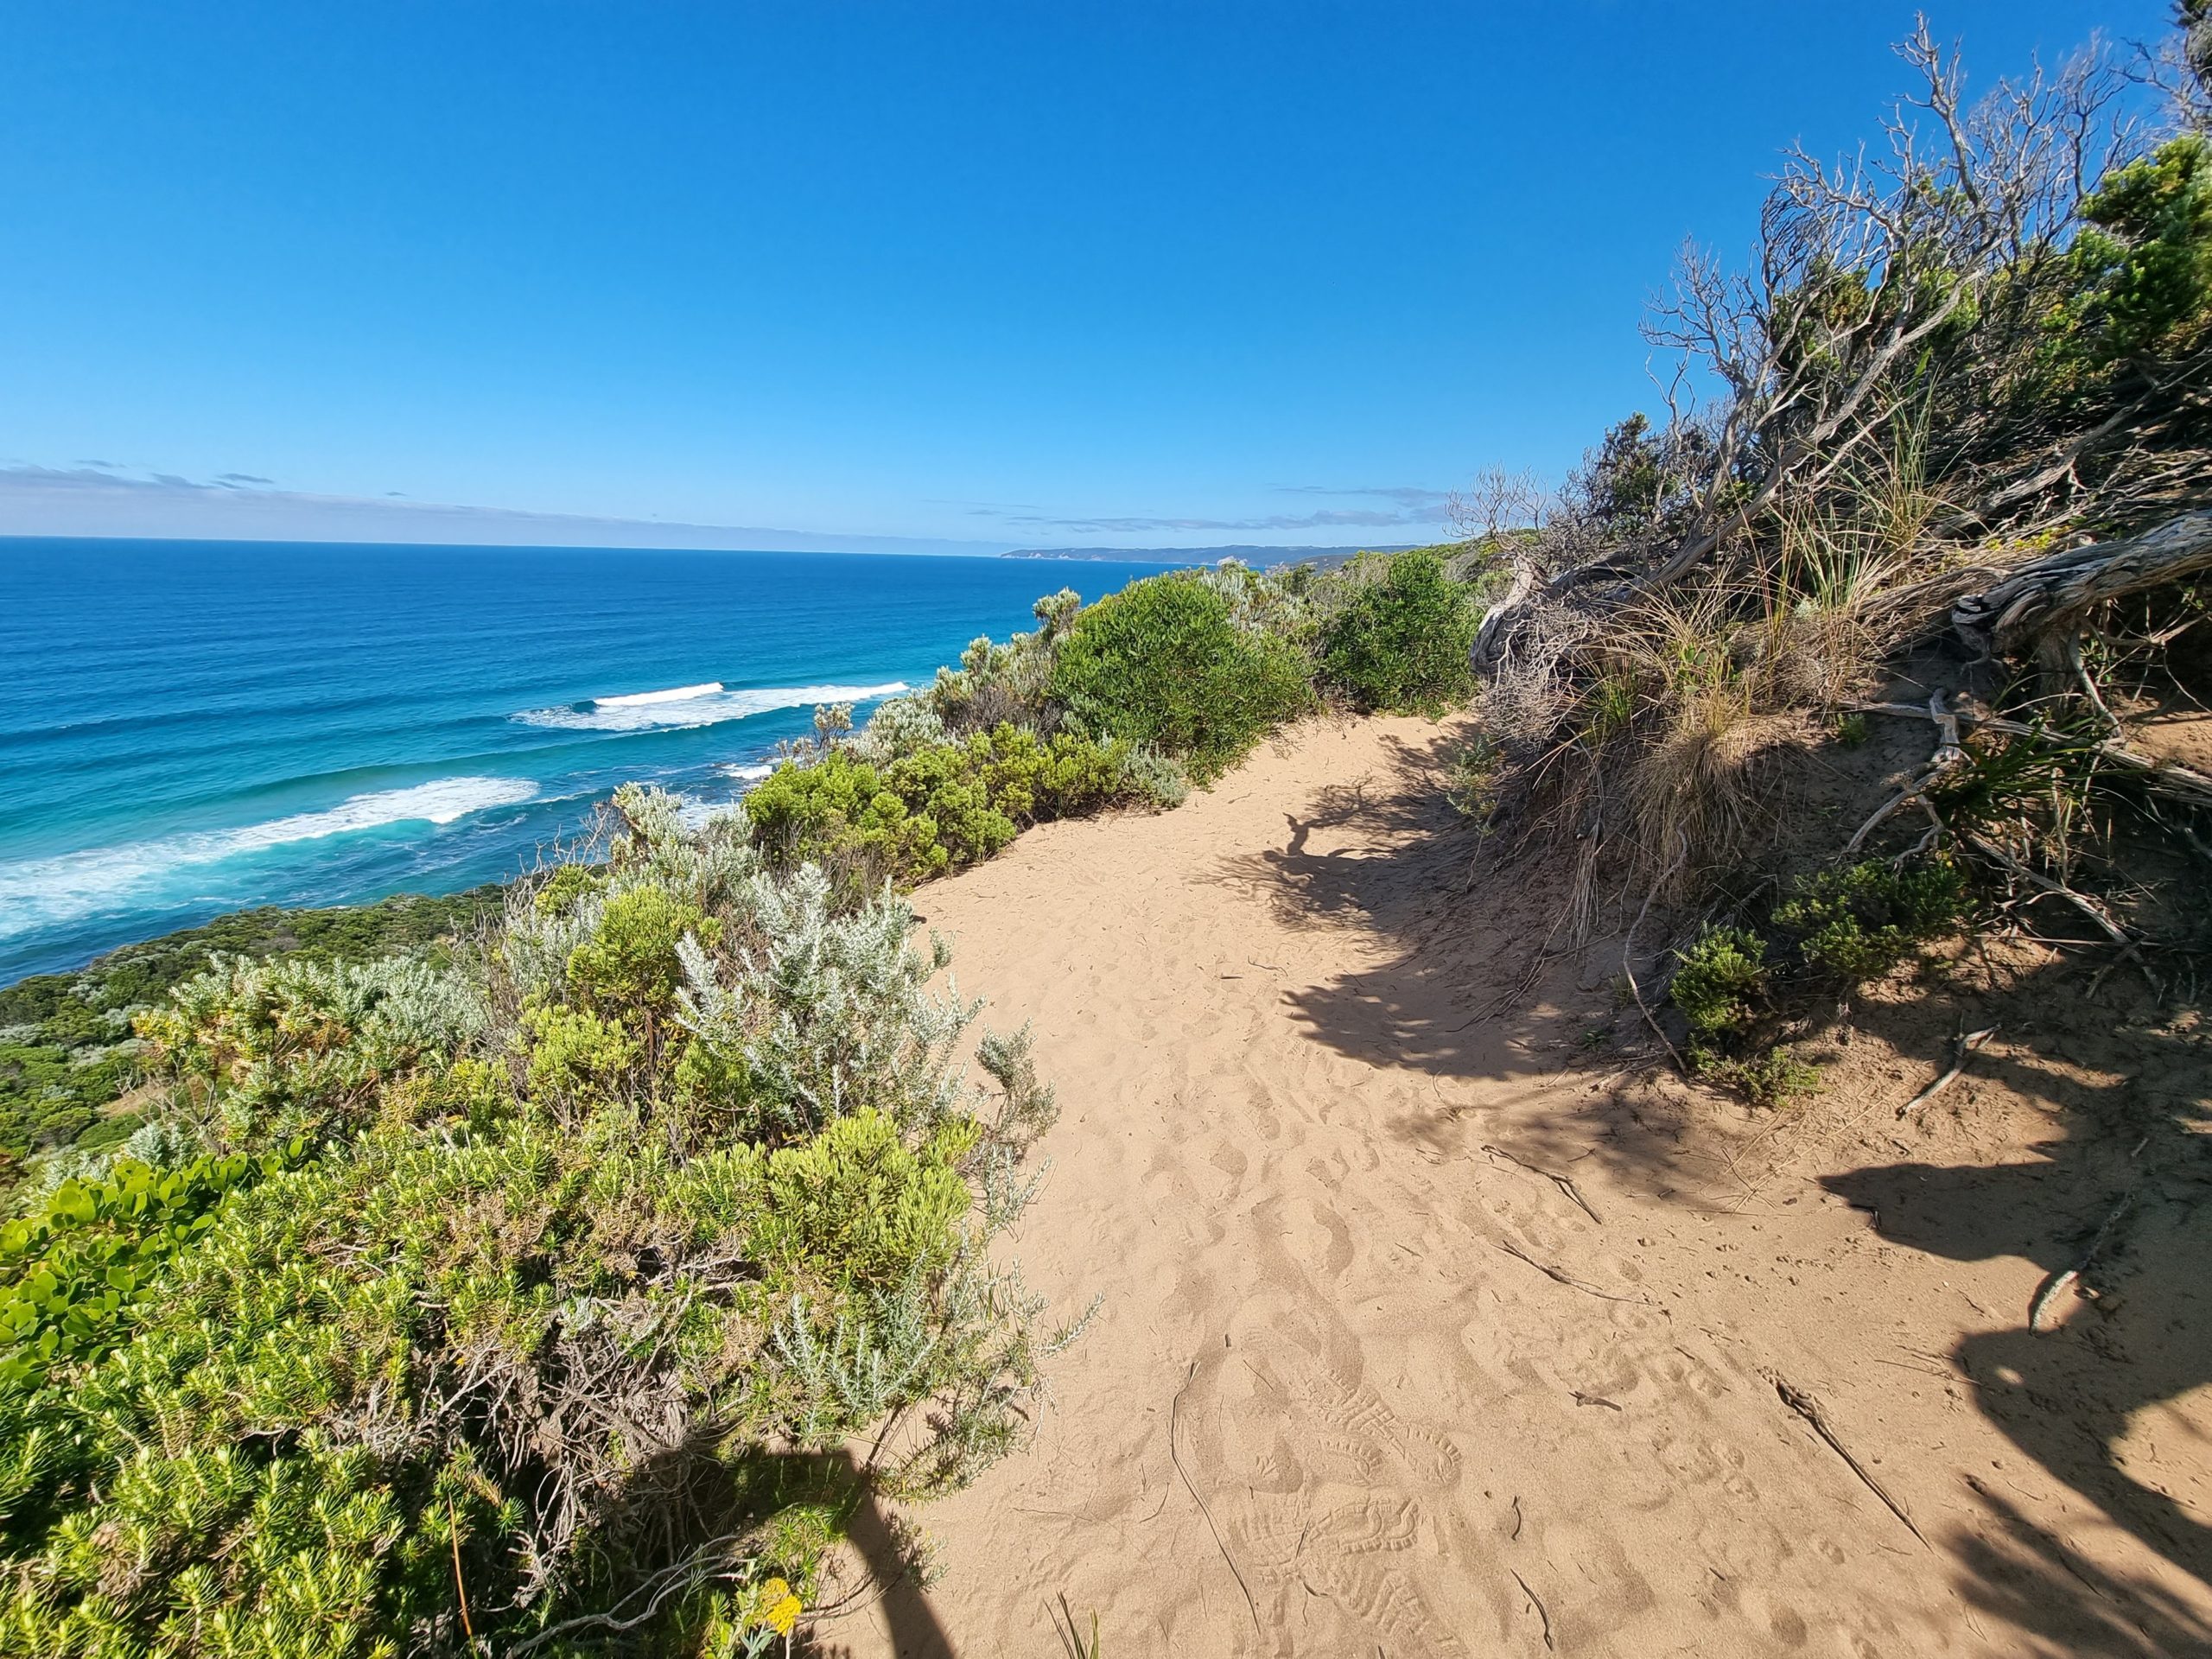 Hiking the Great Ocean Road in Victoria